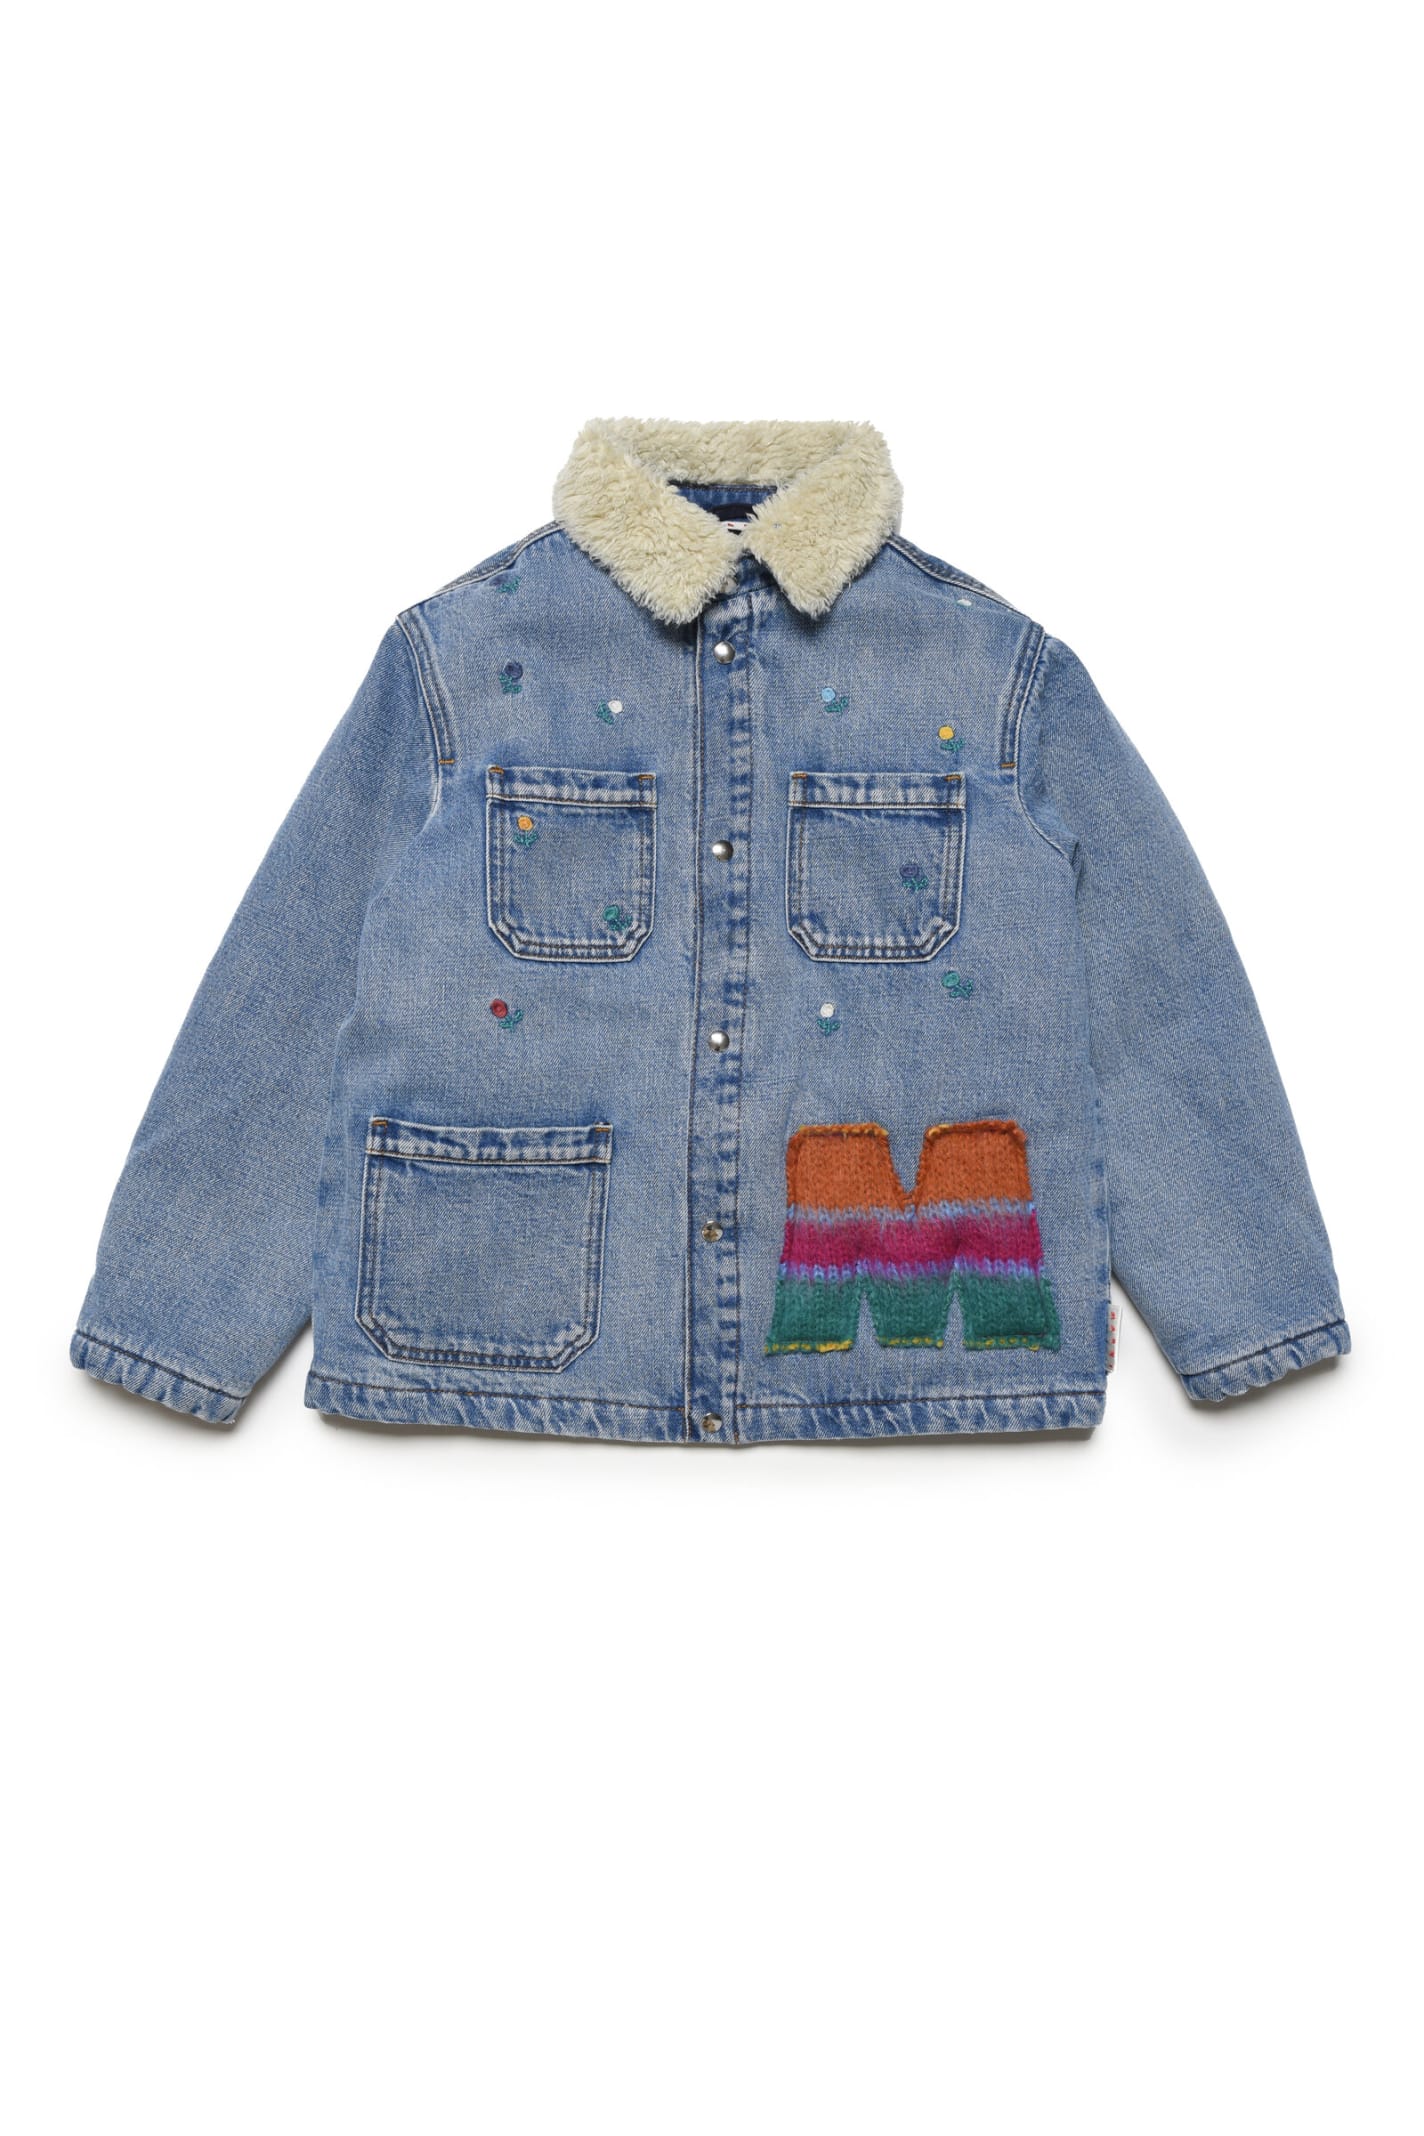 MARNI MJ130F JACKET MARNI LIGHT BLUE JEANS JACKET WITH EMBROIDERED FLOWERS AND PATCHES